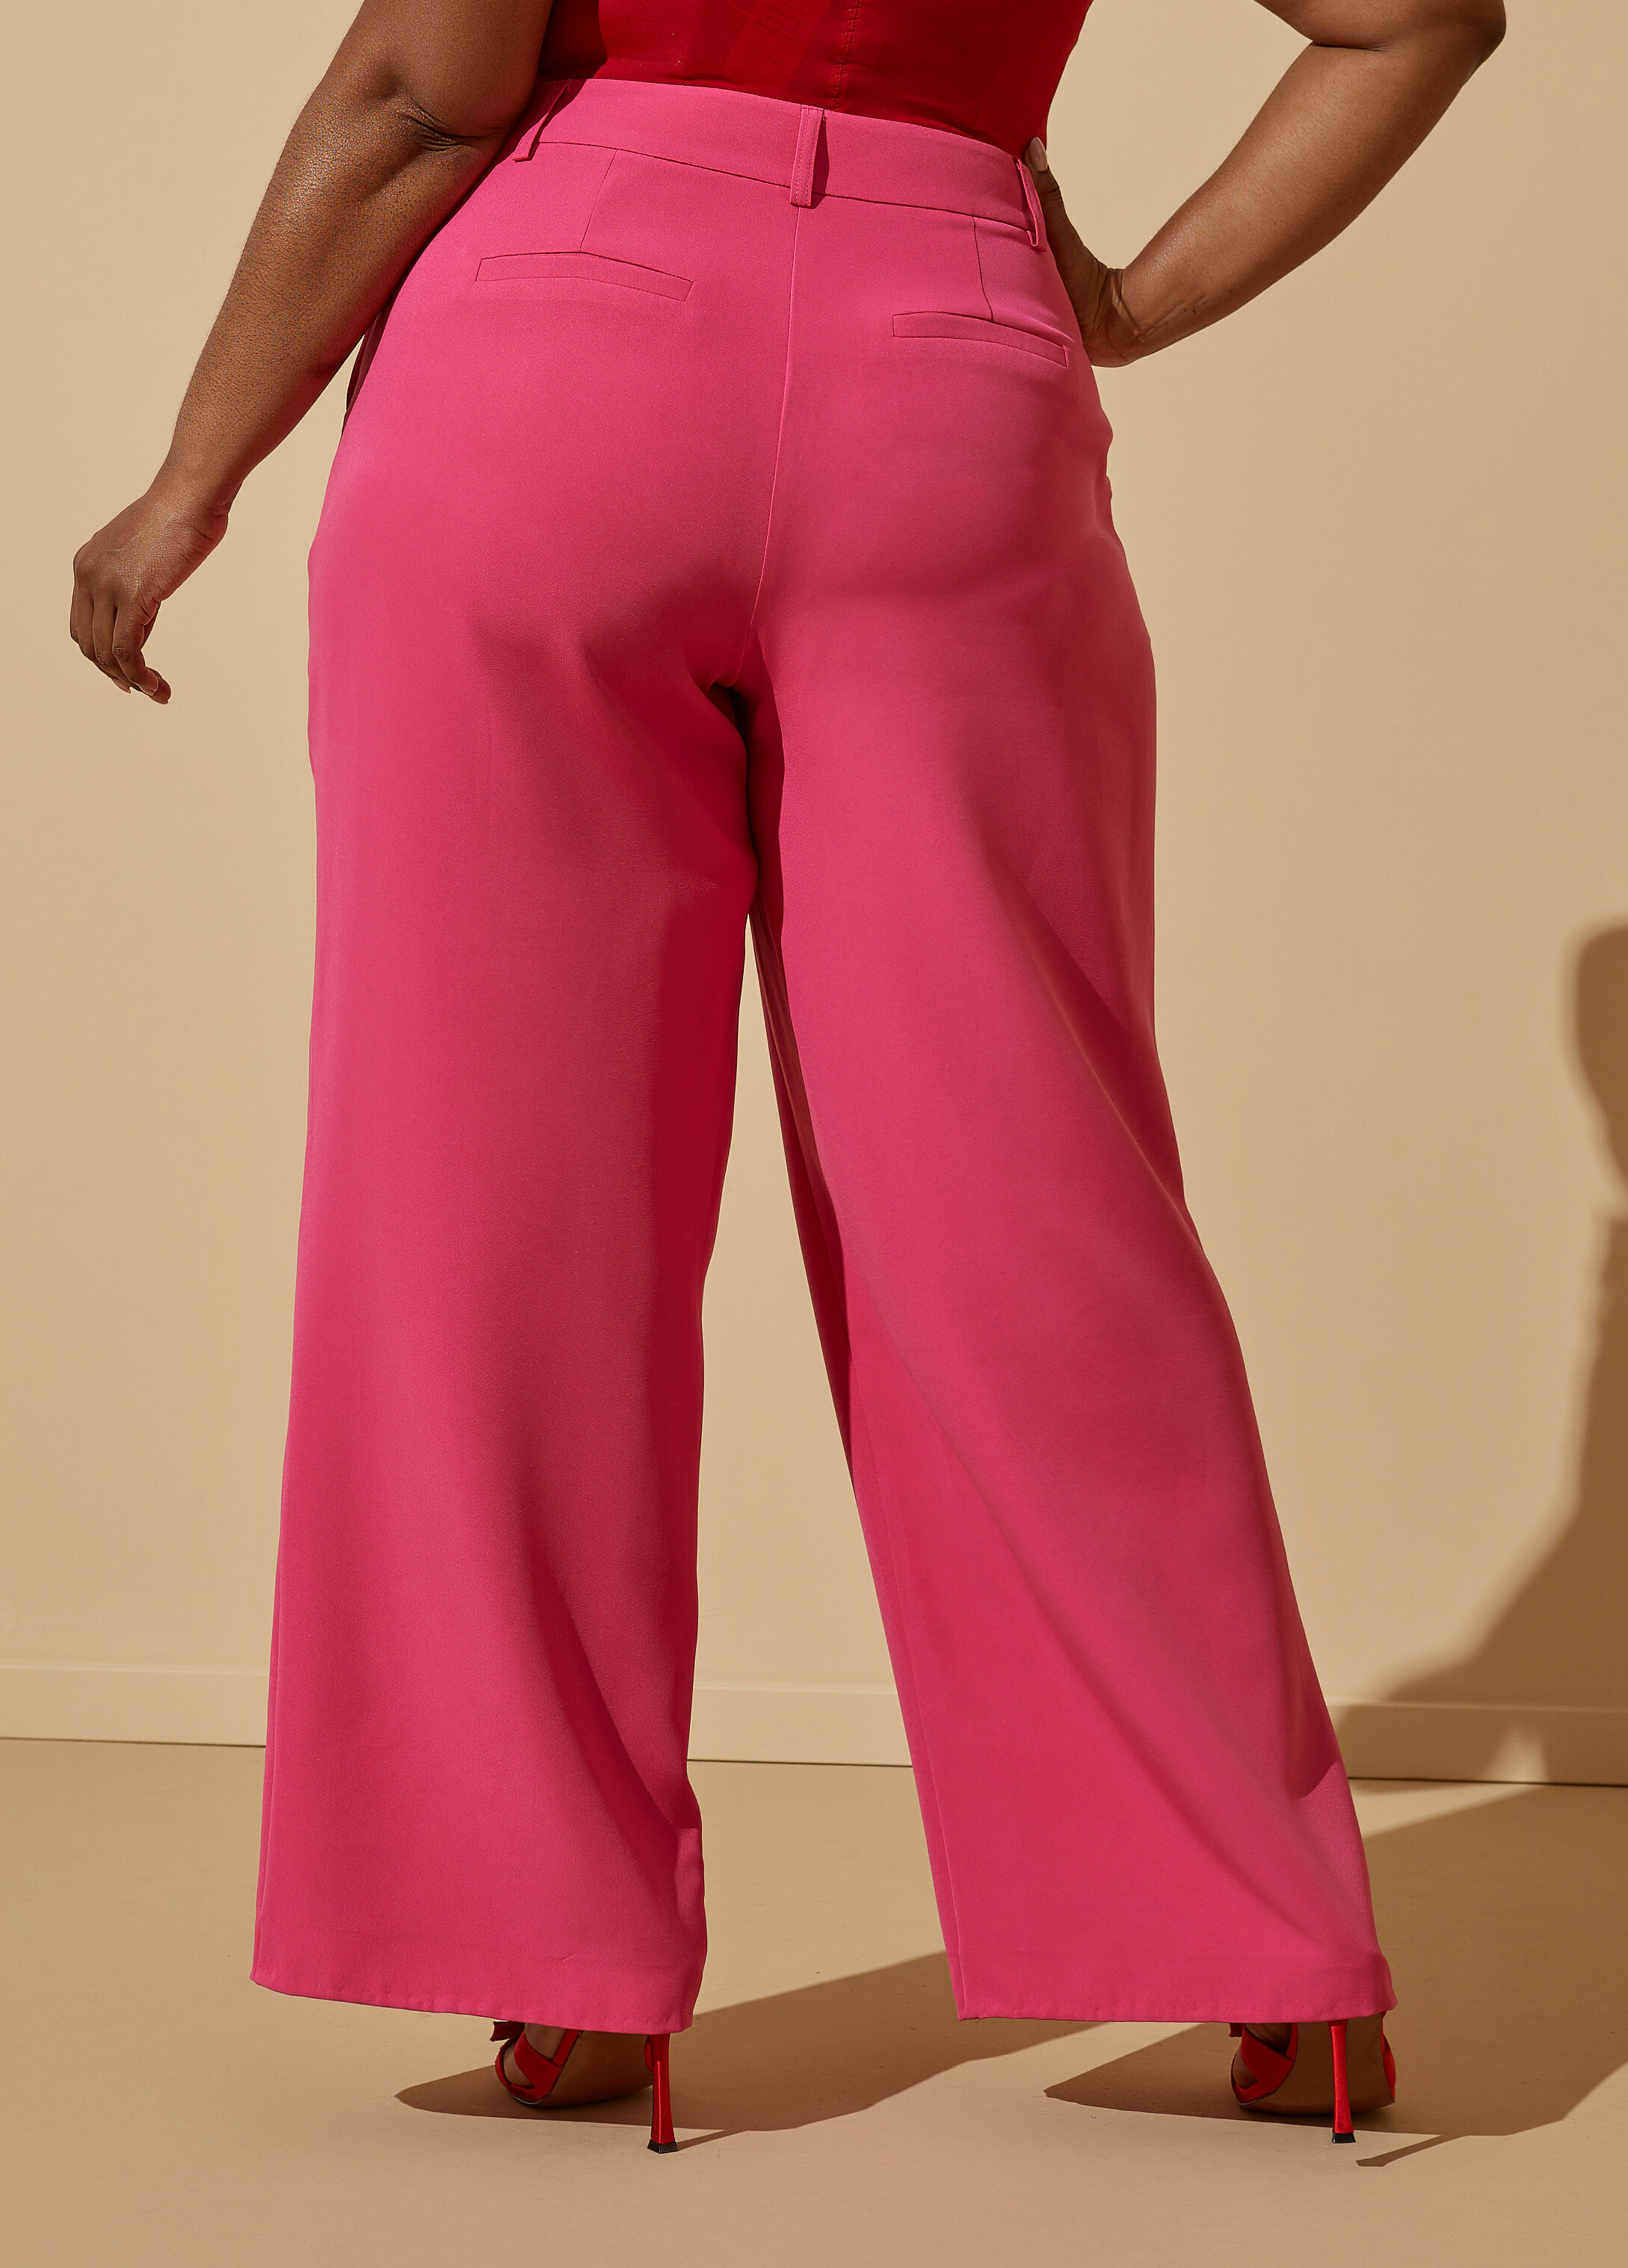 Pink Wide Leg Trousers and Polka Dot Top + Style With a Smile Link Up -  Style Splash